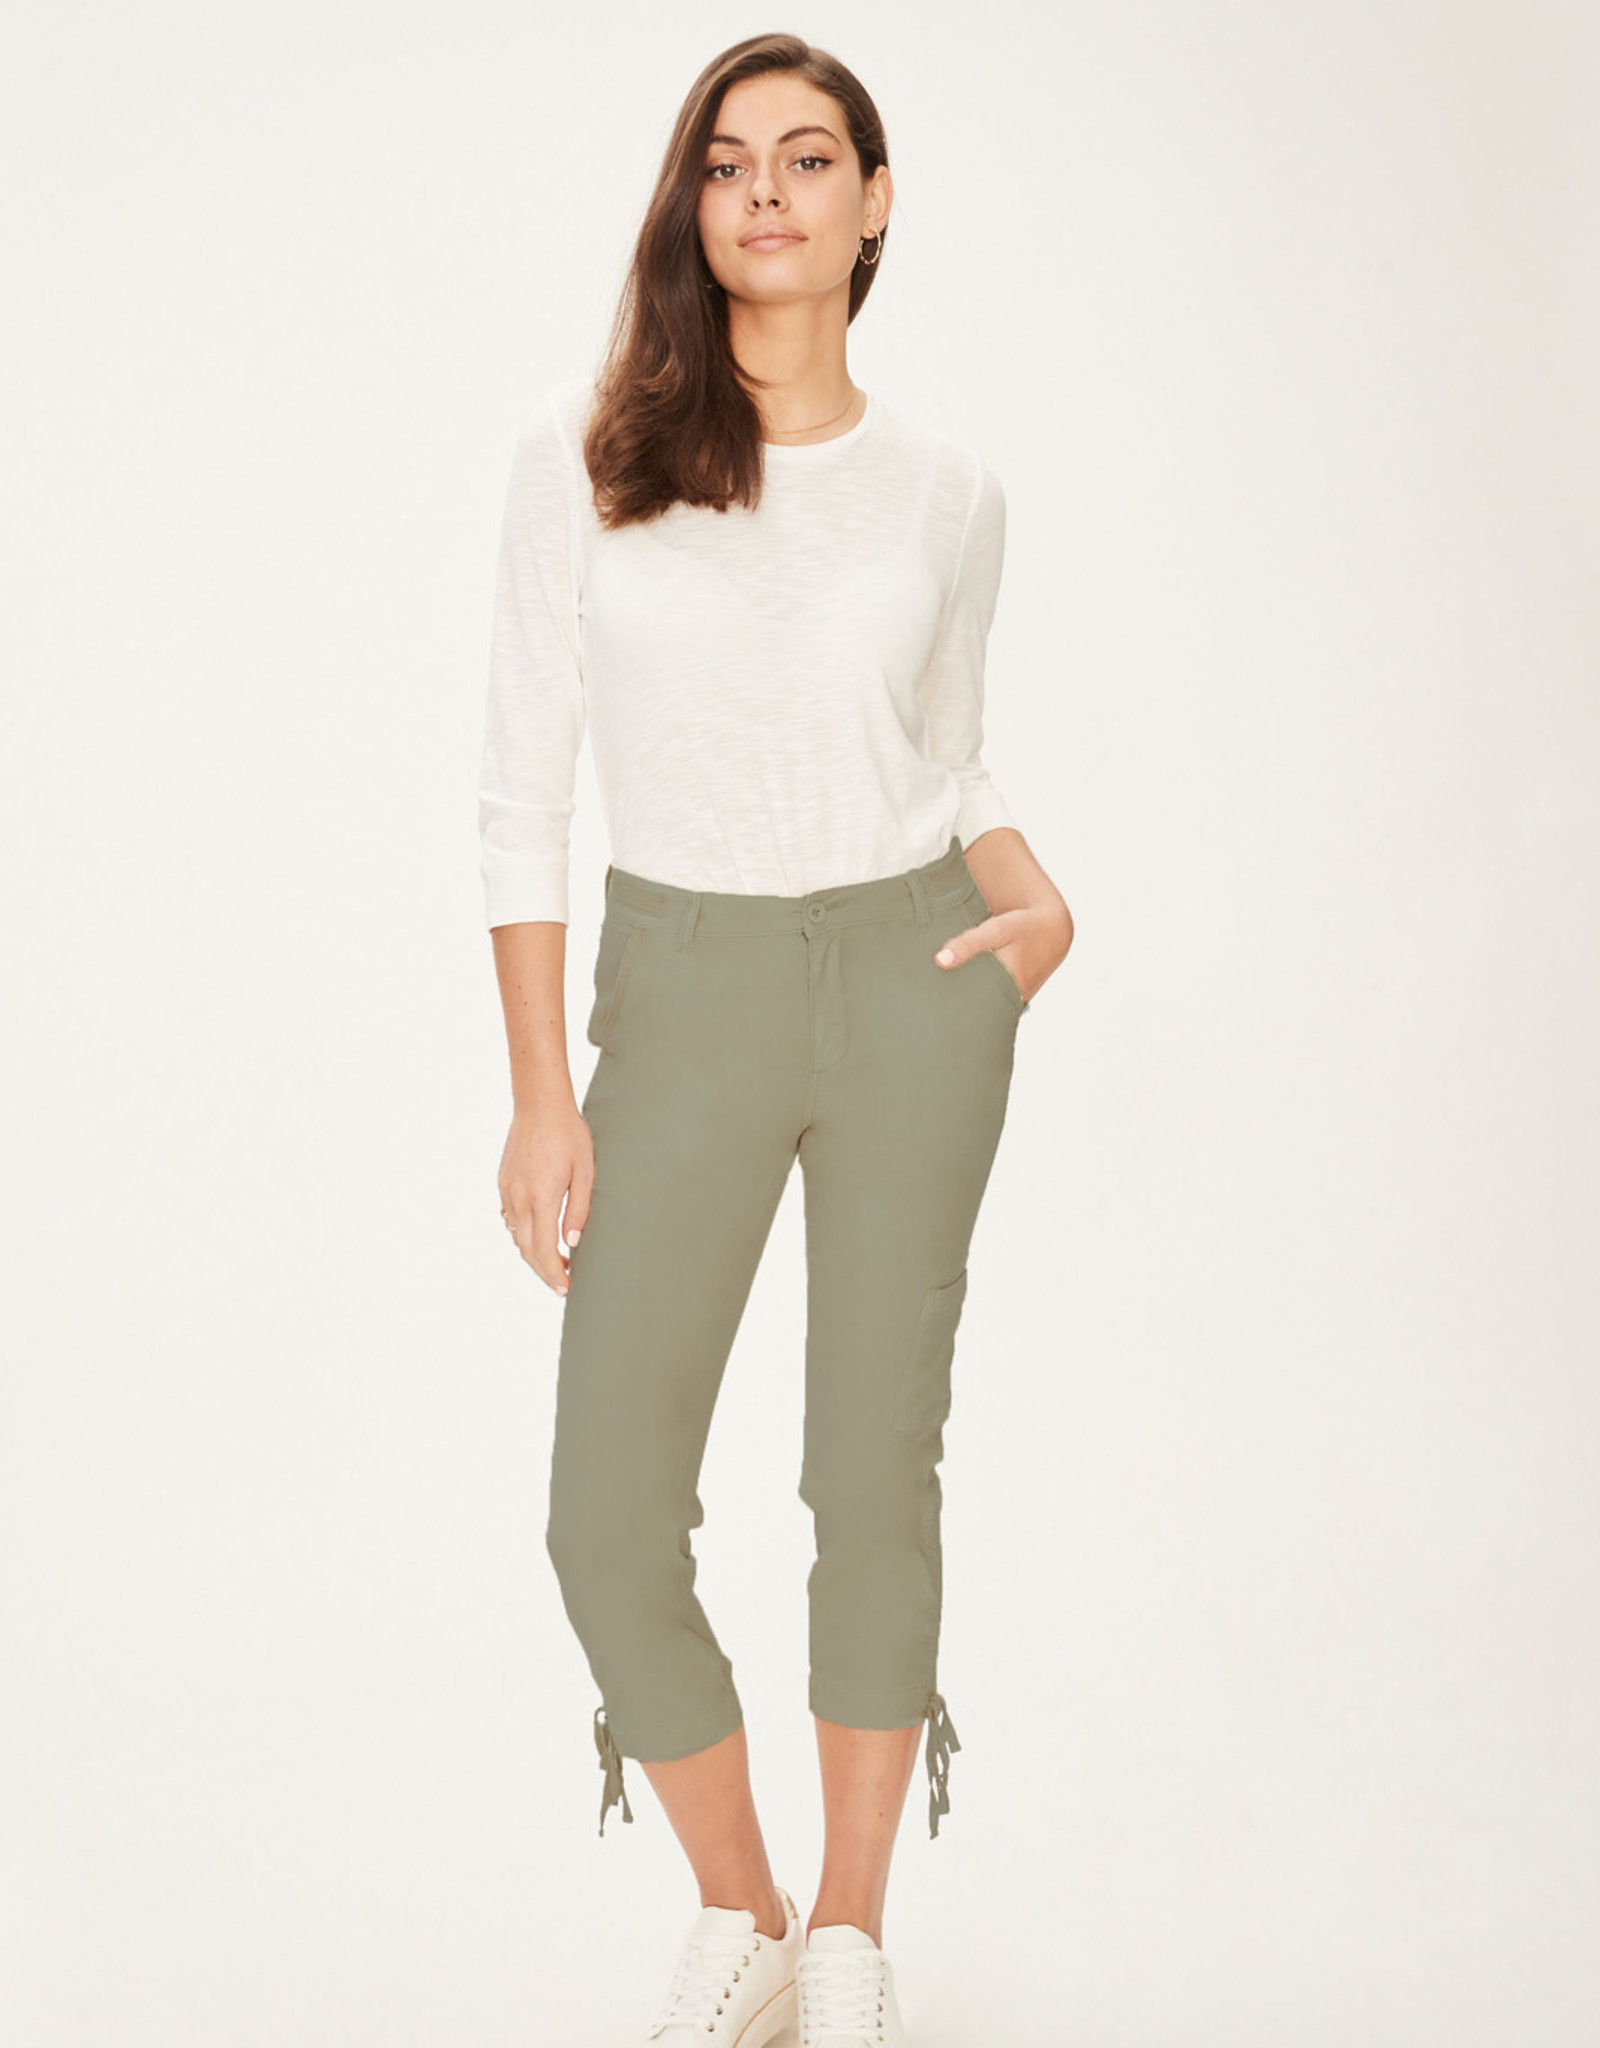 French Dressing Jeans FDJ 2209383 Olivia Straight Leg Ruched Cropped Pant